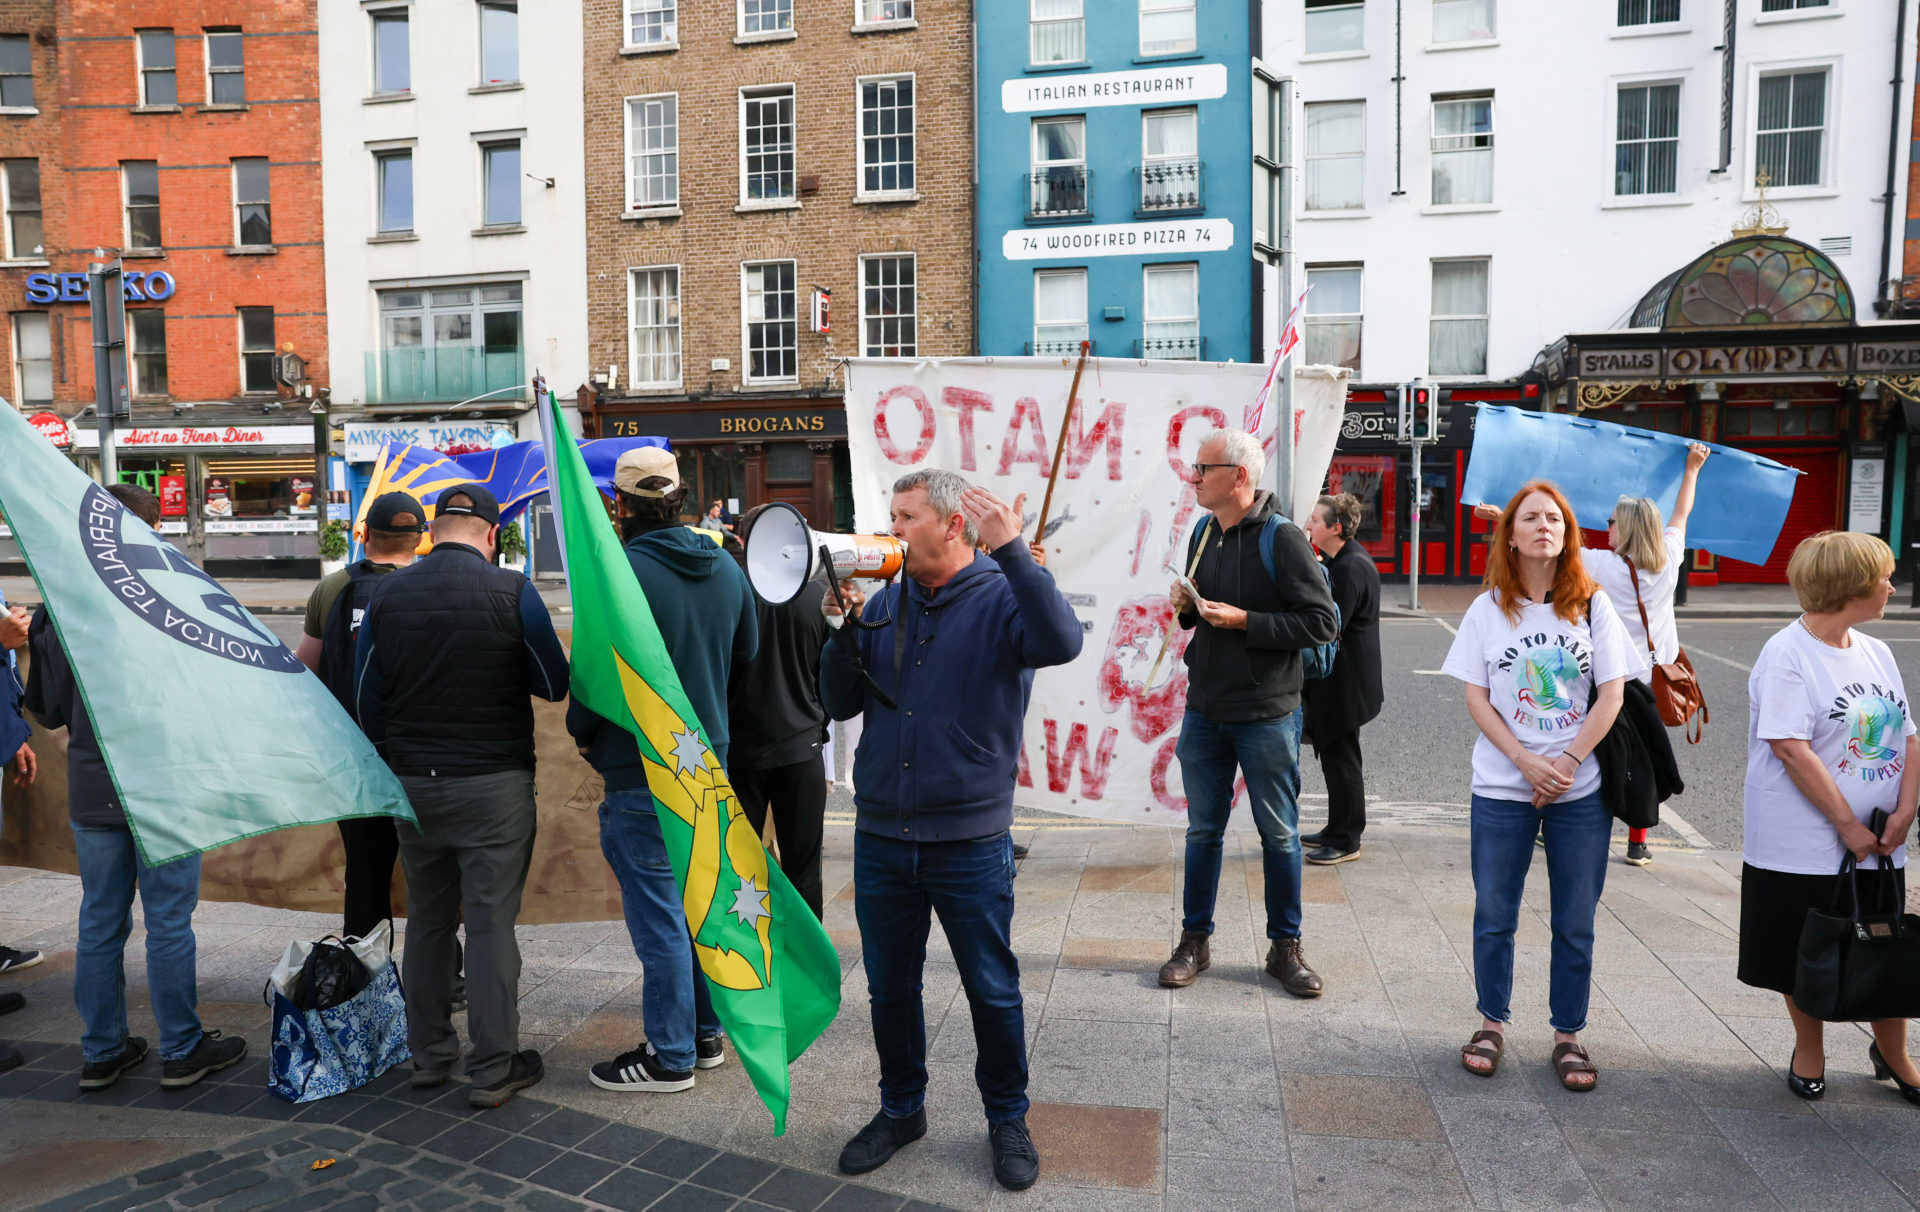 People Before Profit TD Richard Boyd Barrett addresses protesters outside Dublin Castle, where the government's Consultative Forum on International Policy is taking place,